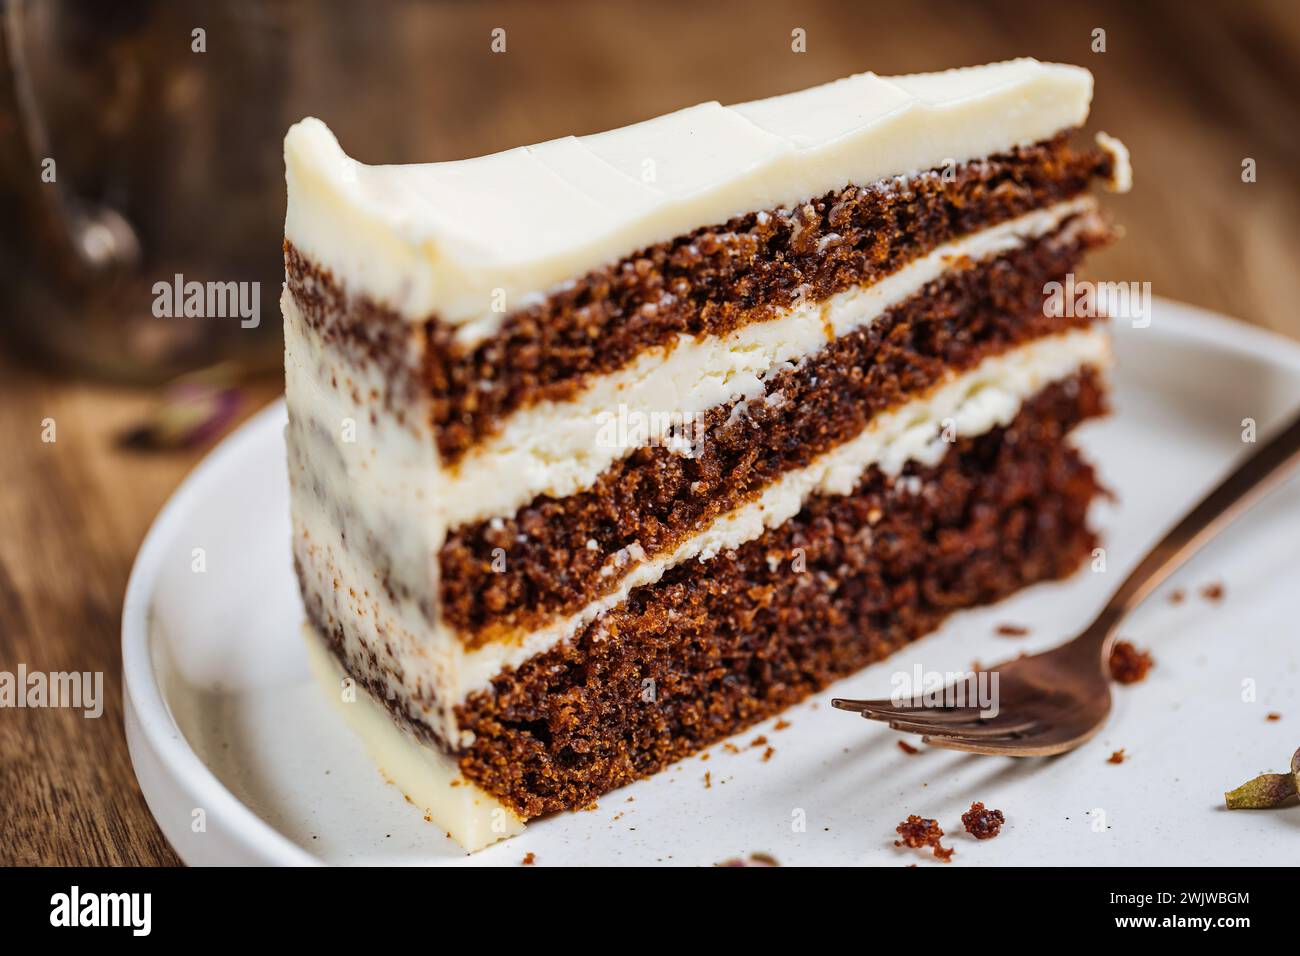 A piece of carrot cake served on rustic wooden tray. bright sunny scene. Layered cake with cream cheese frosting and fluffy biscuit. Stock Photo